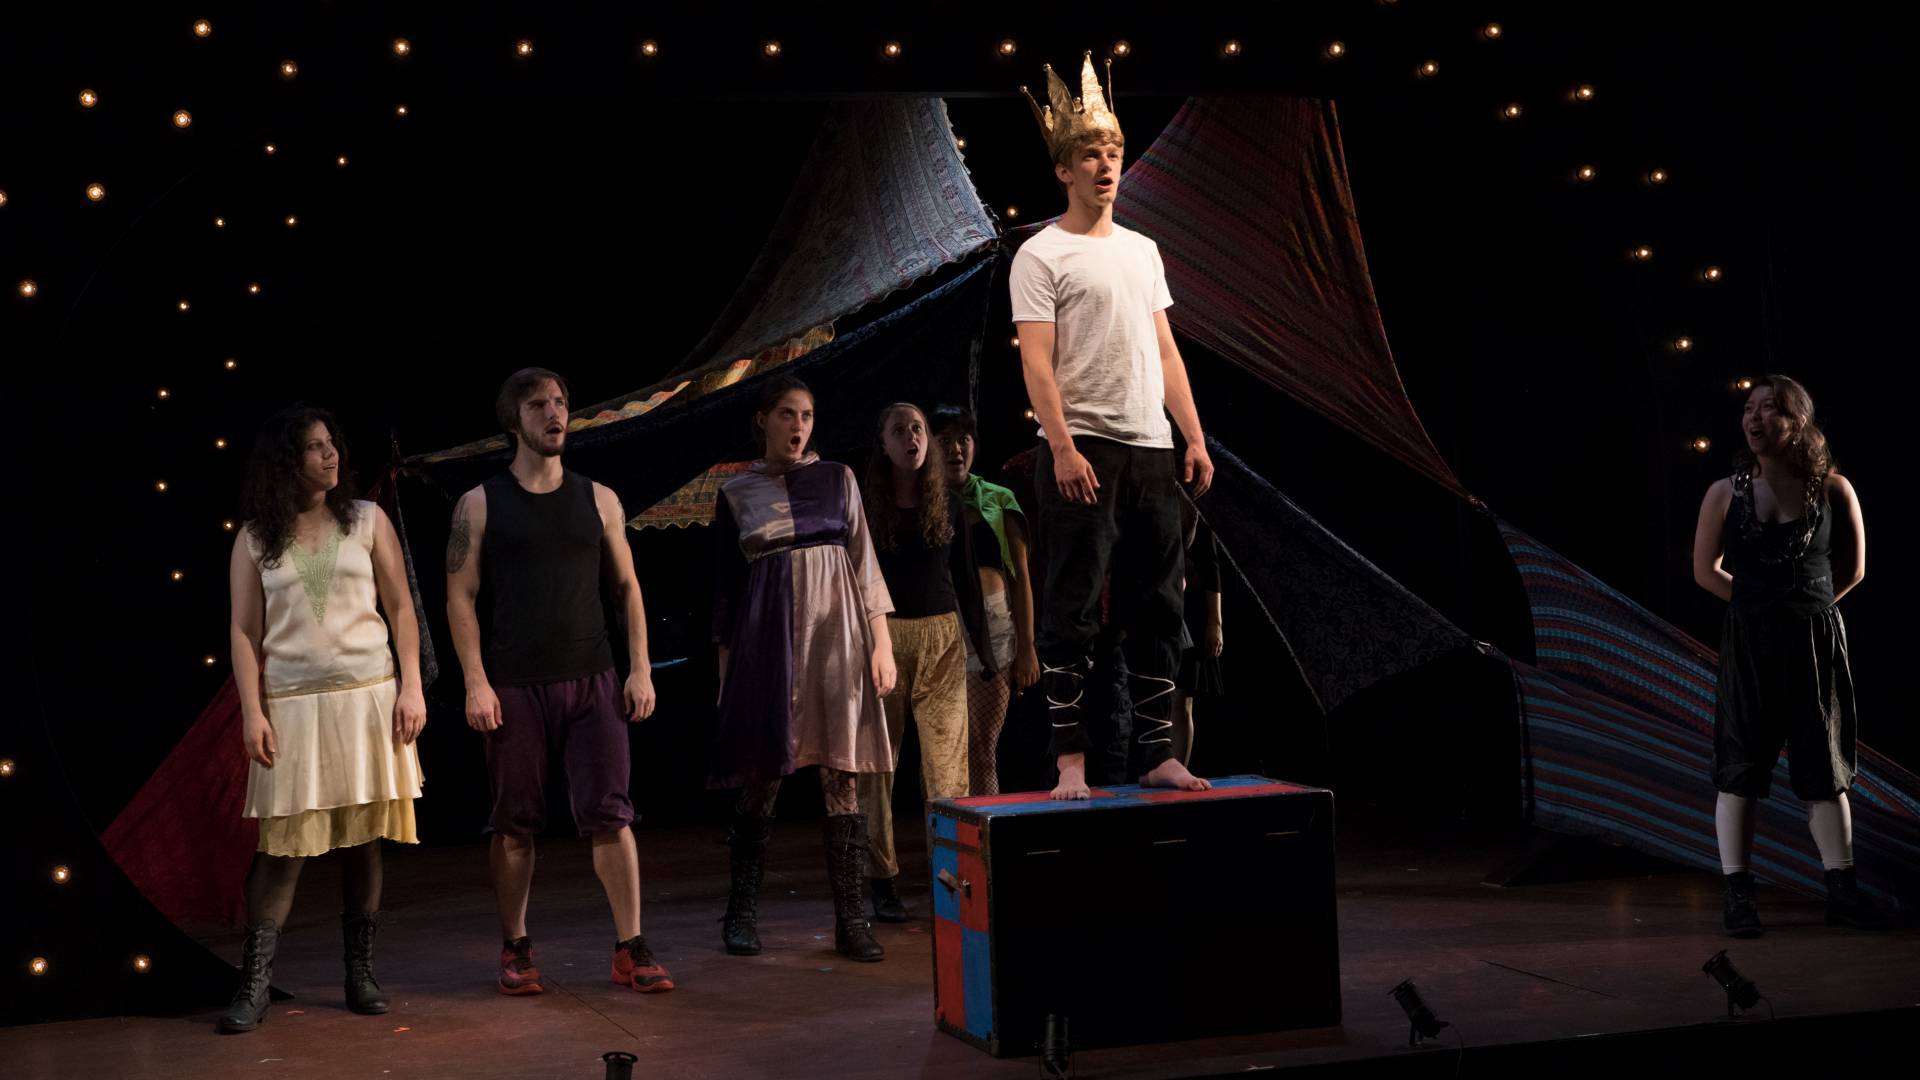 Scene from Princeton Summer Theater 2017 production of Pippin